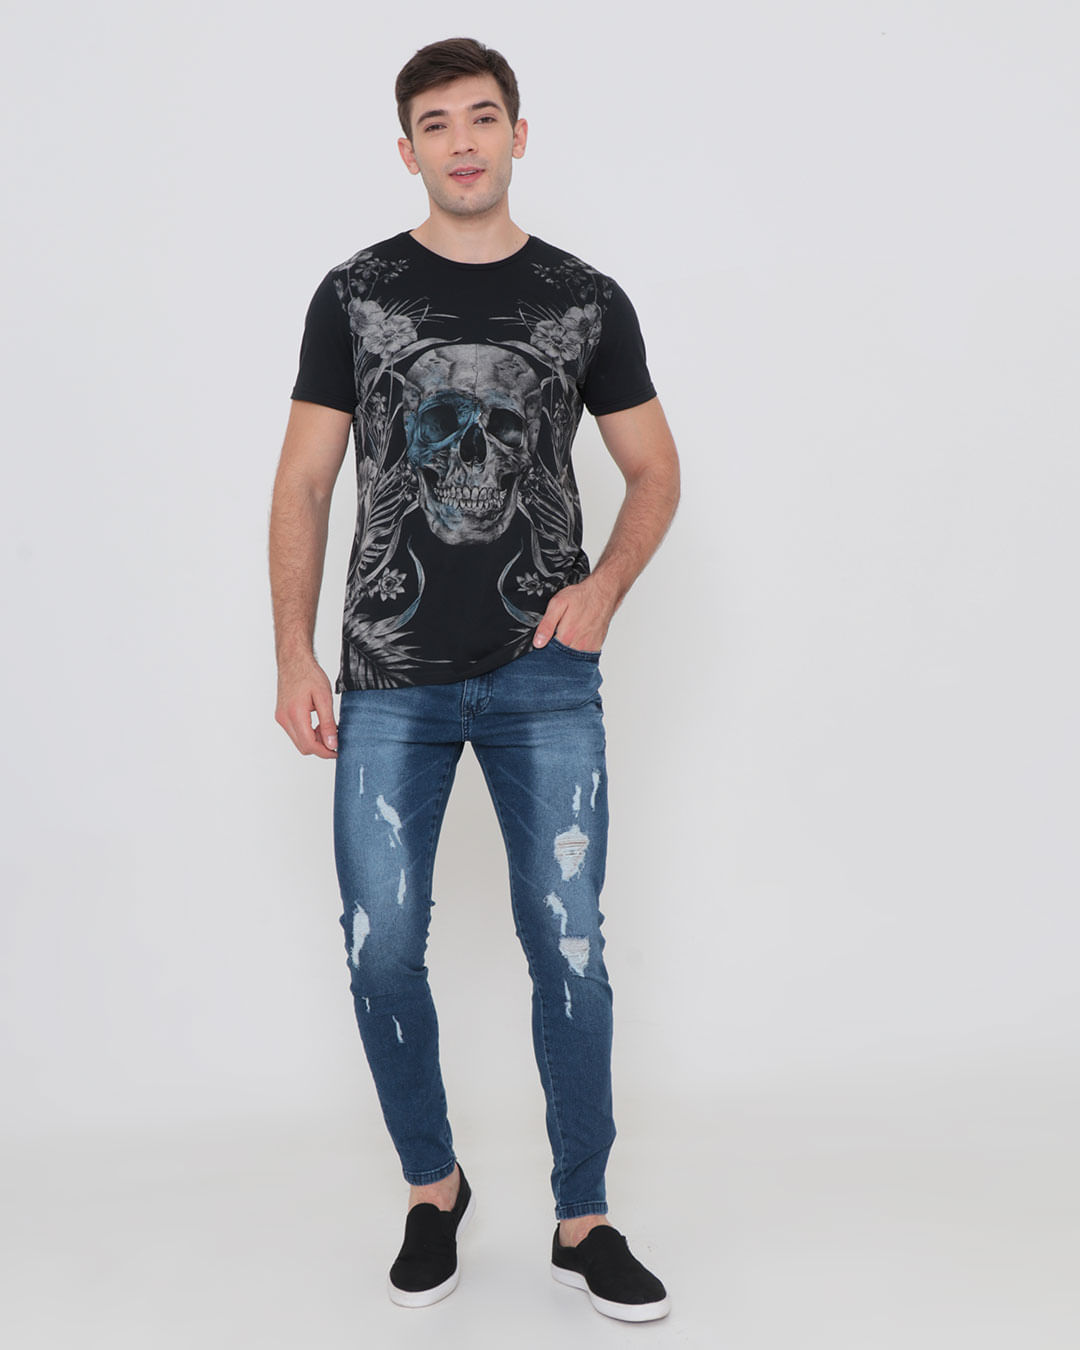 Calca-Jeans-Masculina-Skinny-Destroyed-Azul